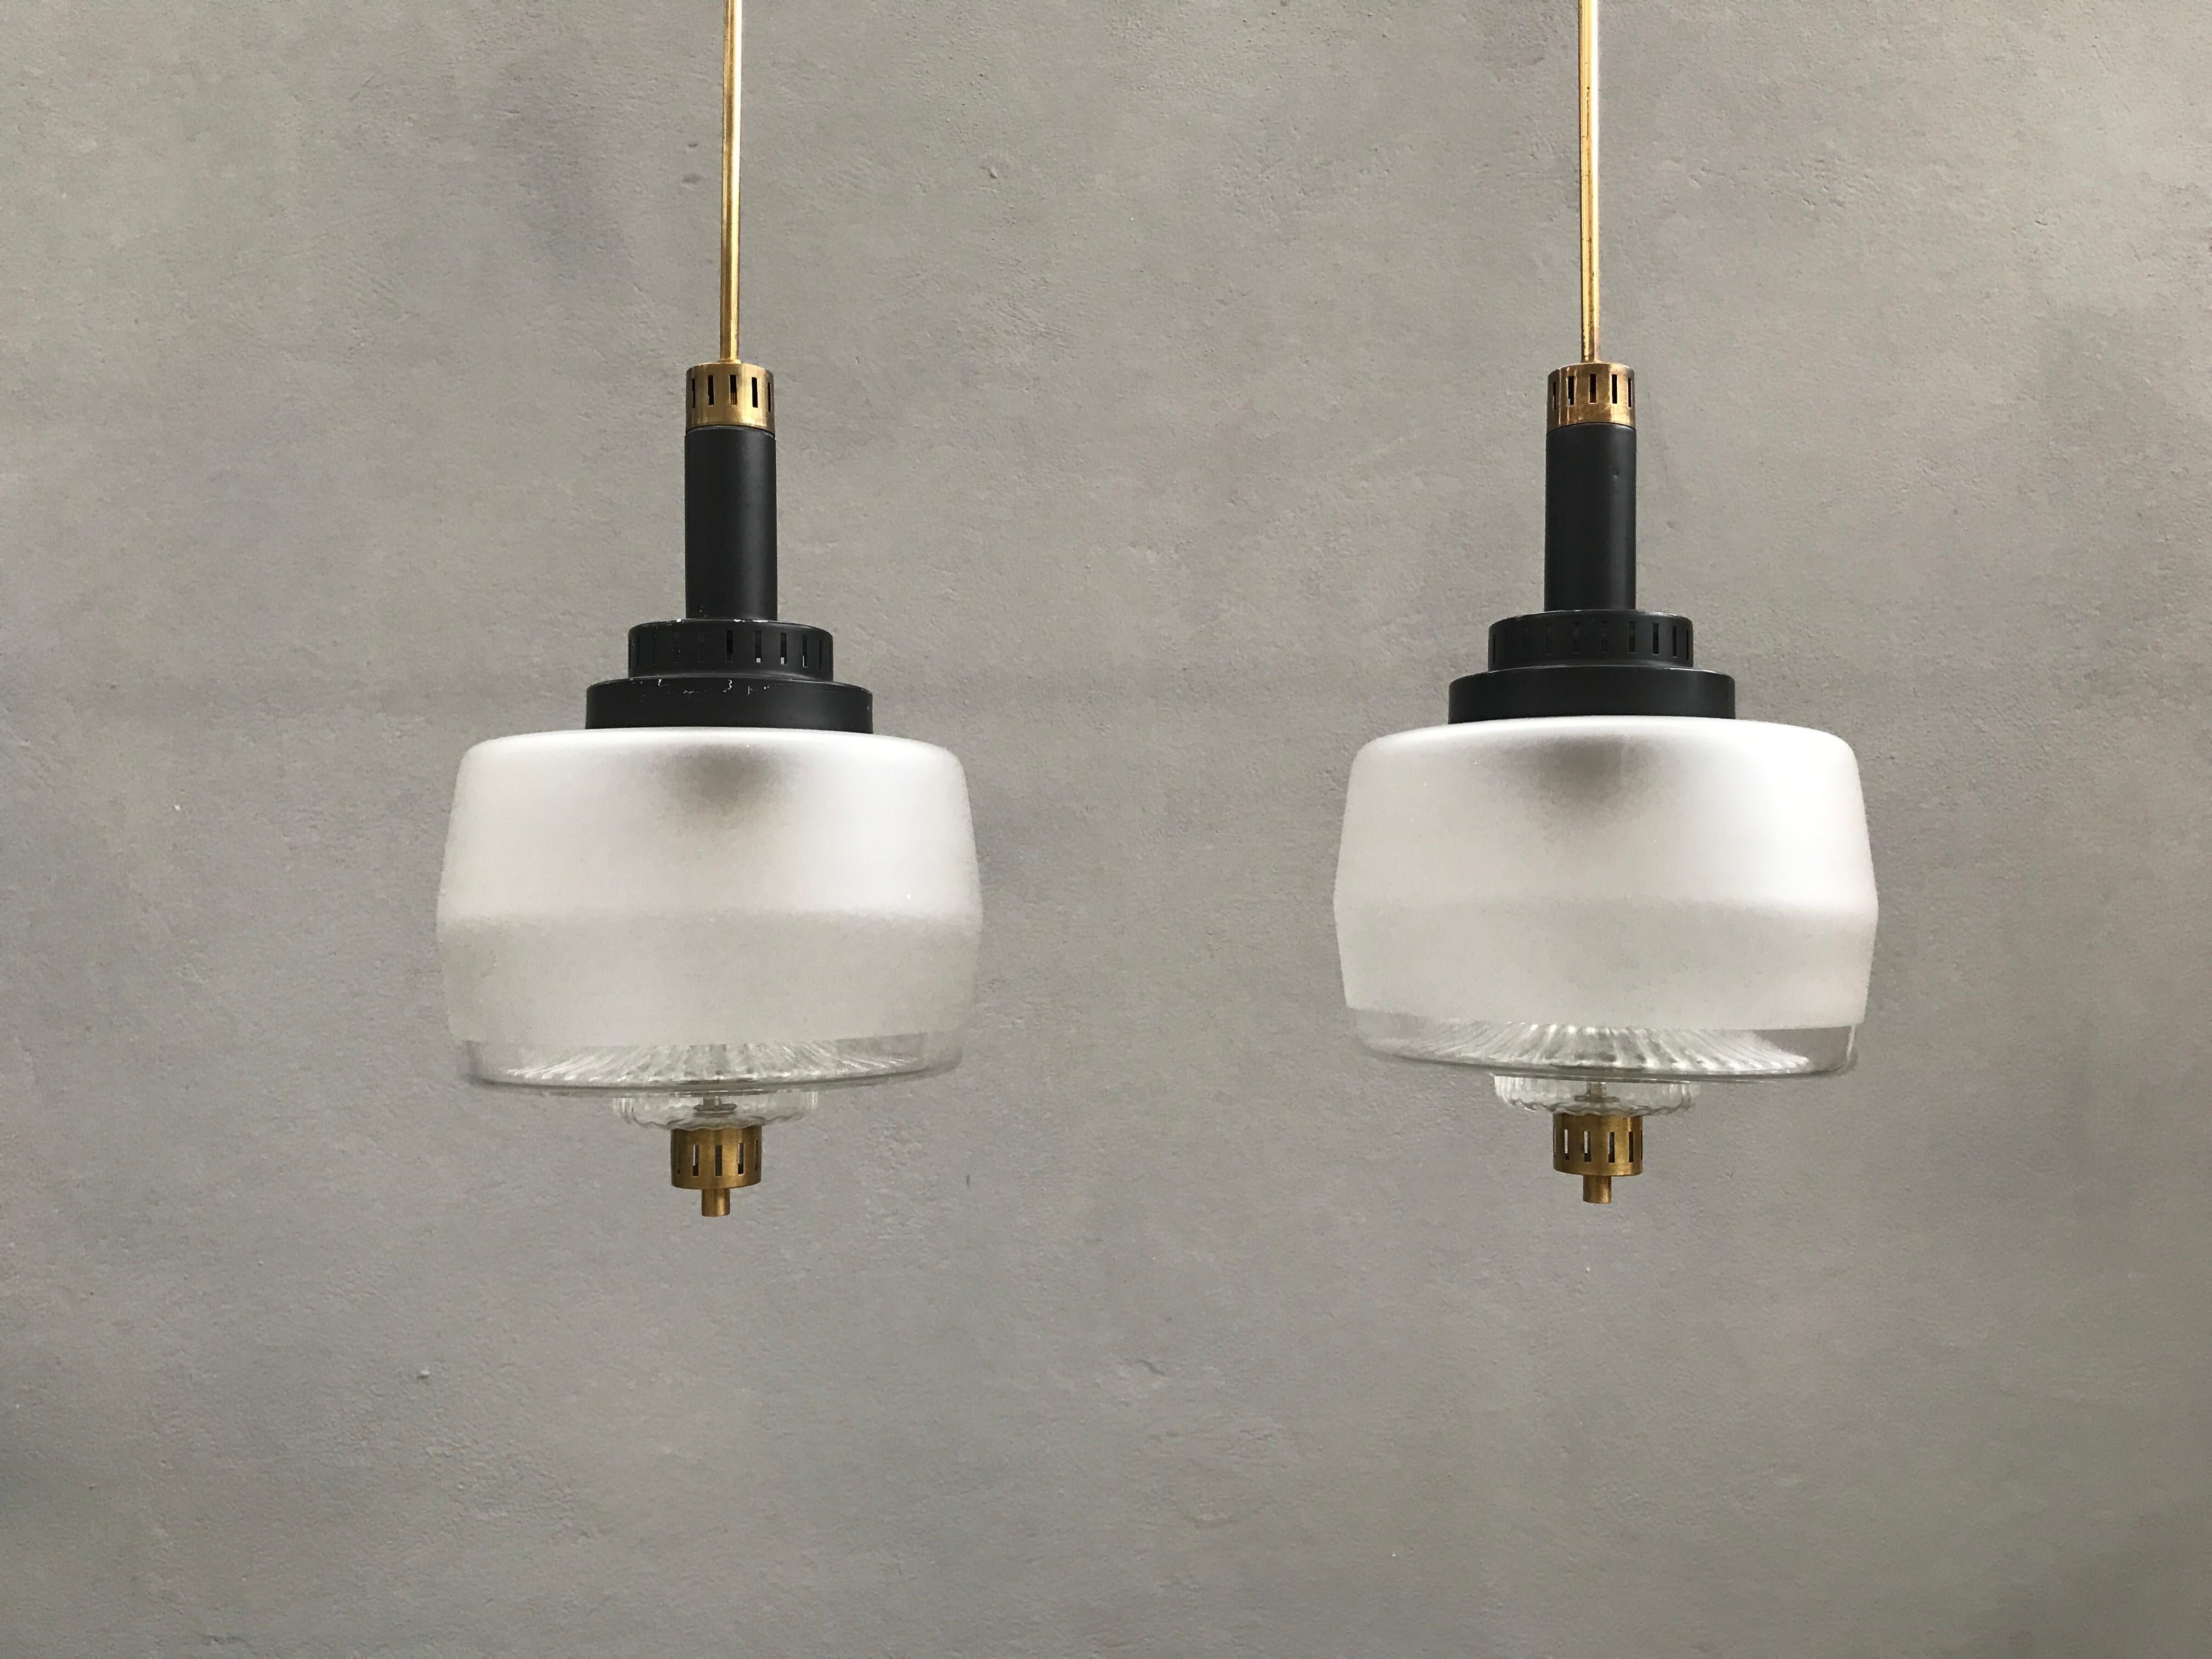 White opaline glass, black lacquered metal and brass structure.